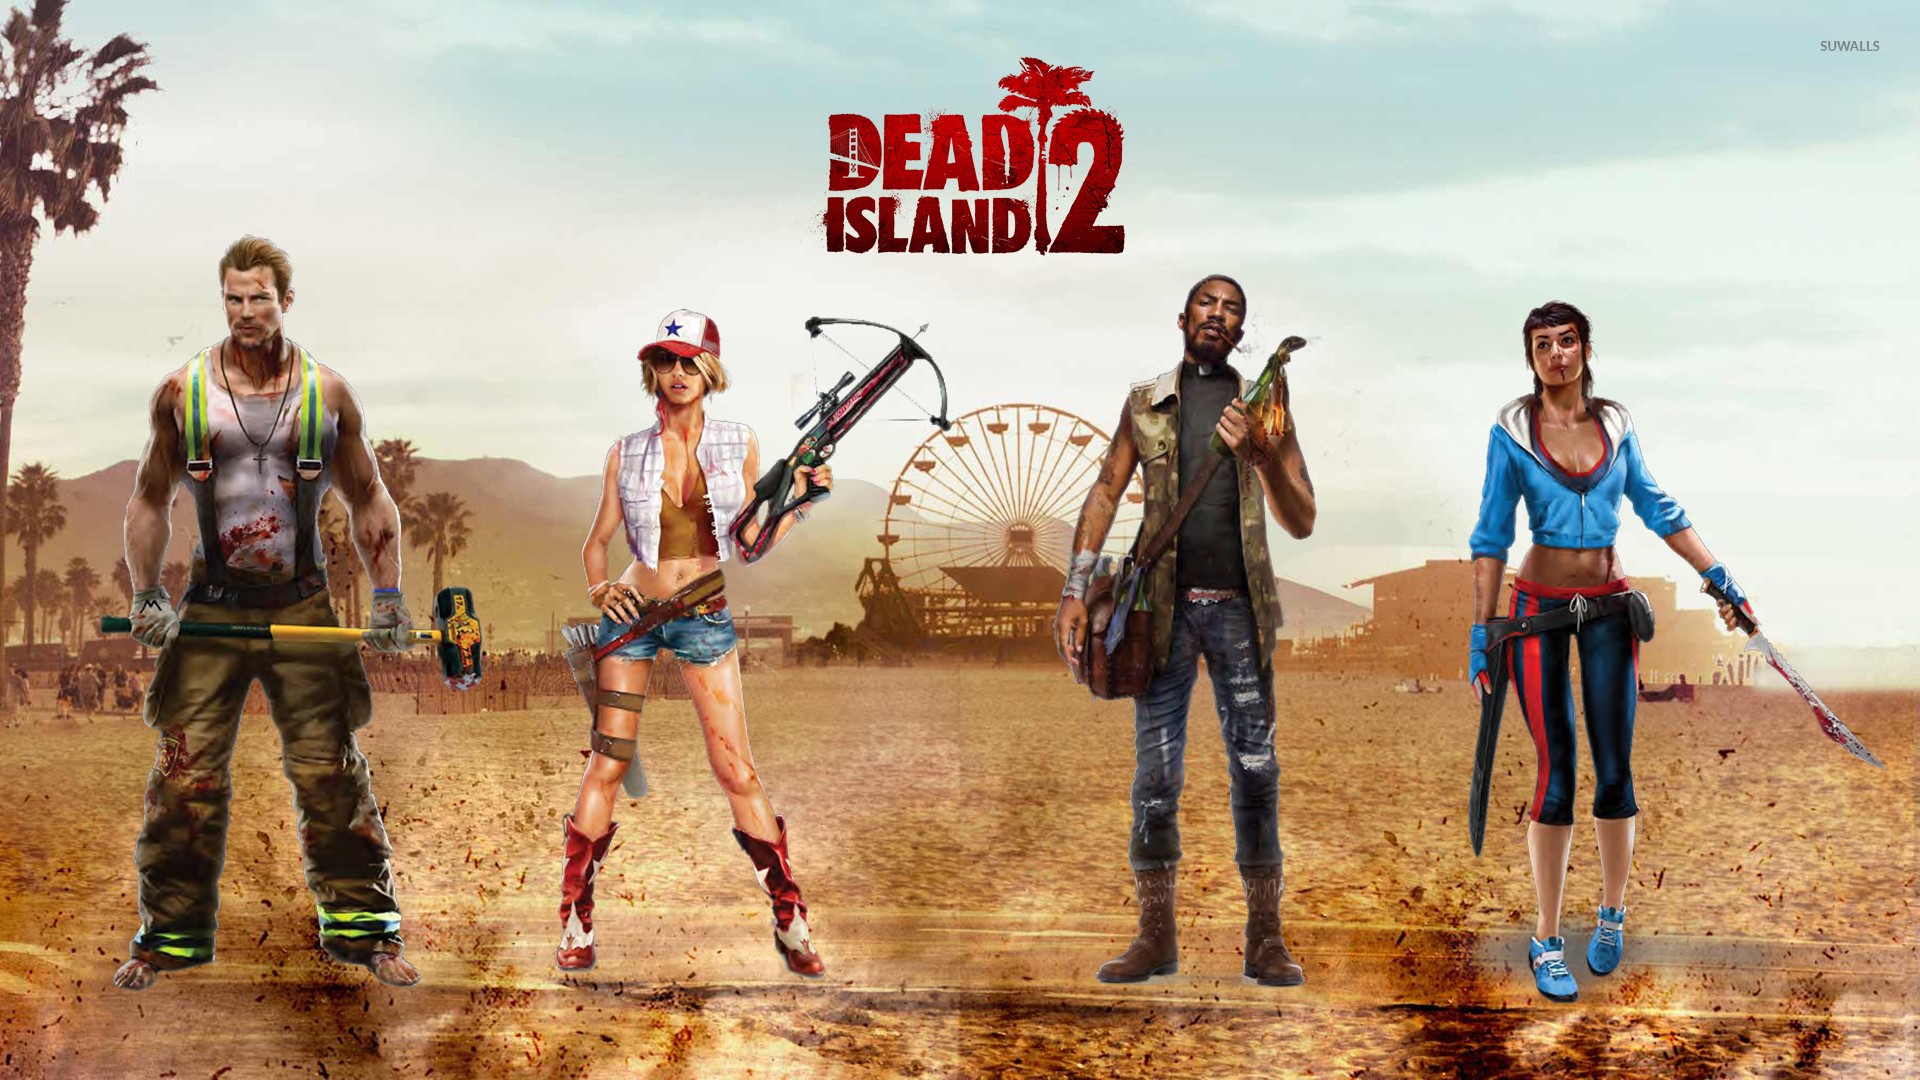 10 facts about Dead Island 2 Game that you didn't know